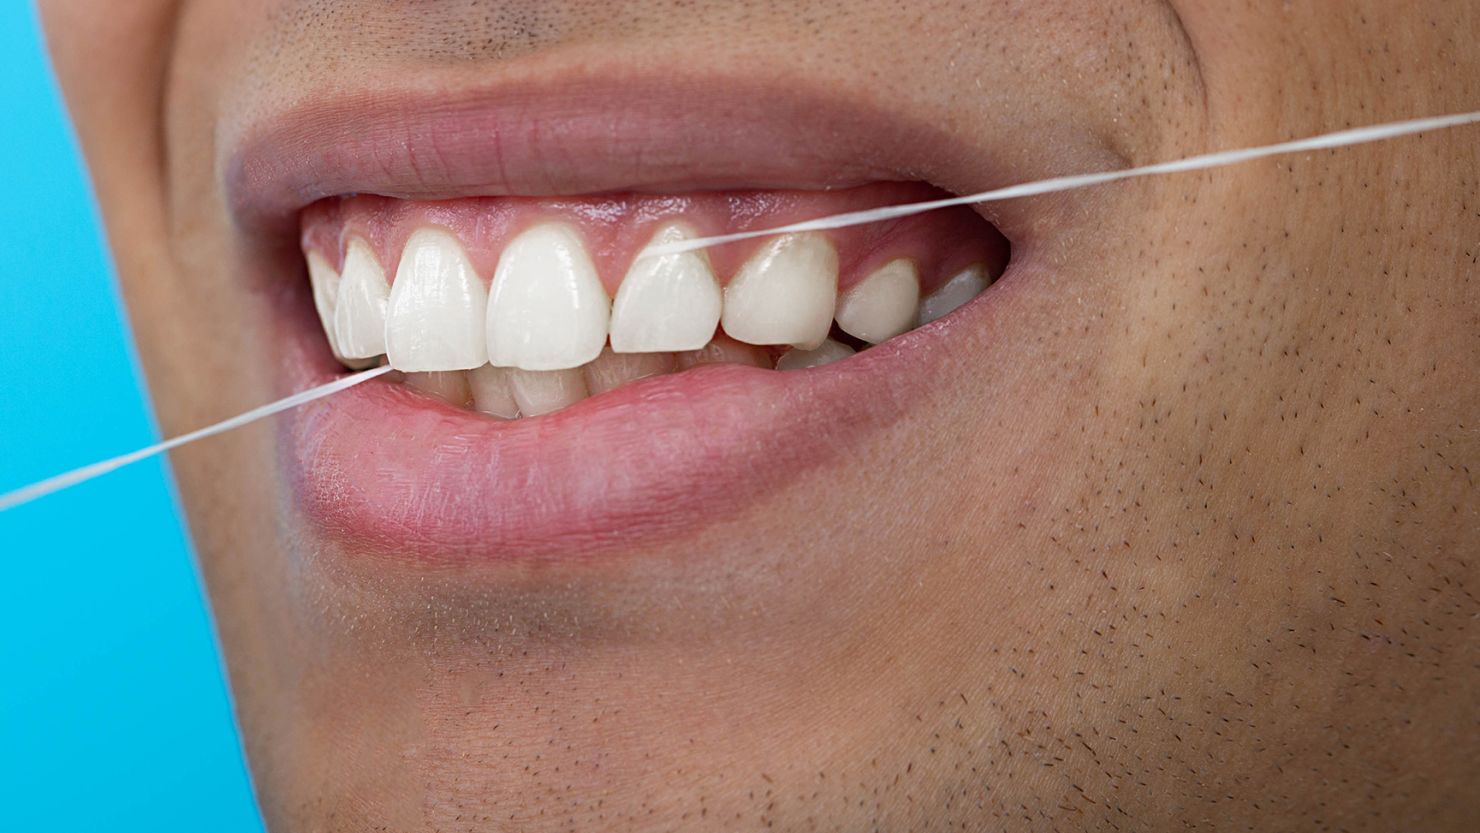 Includes flossing in oral hygiene routines · Read this tips